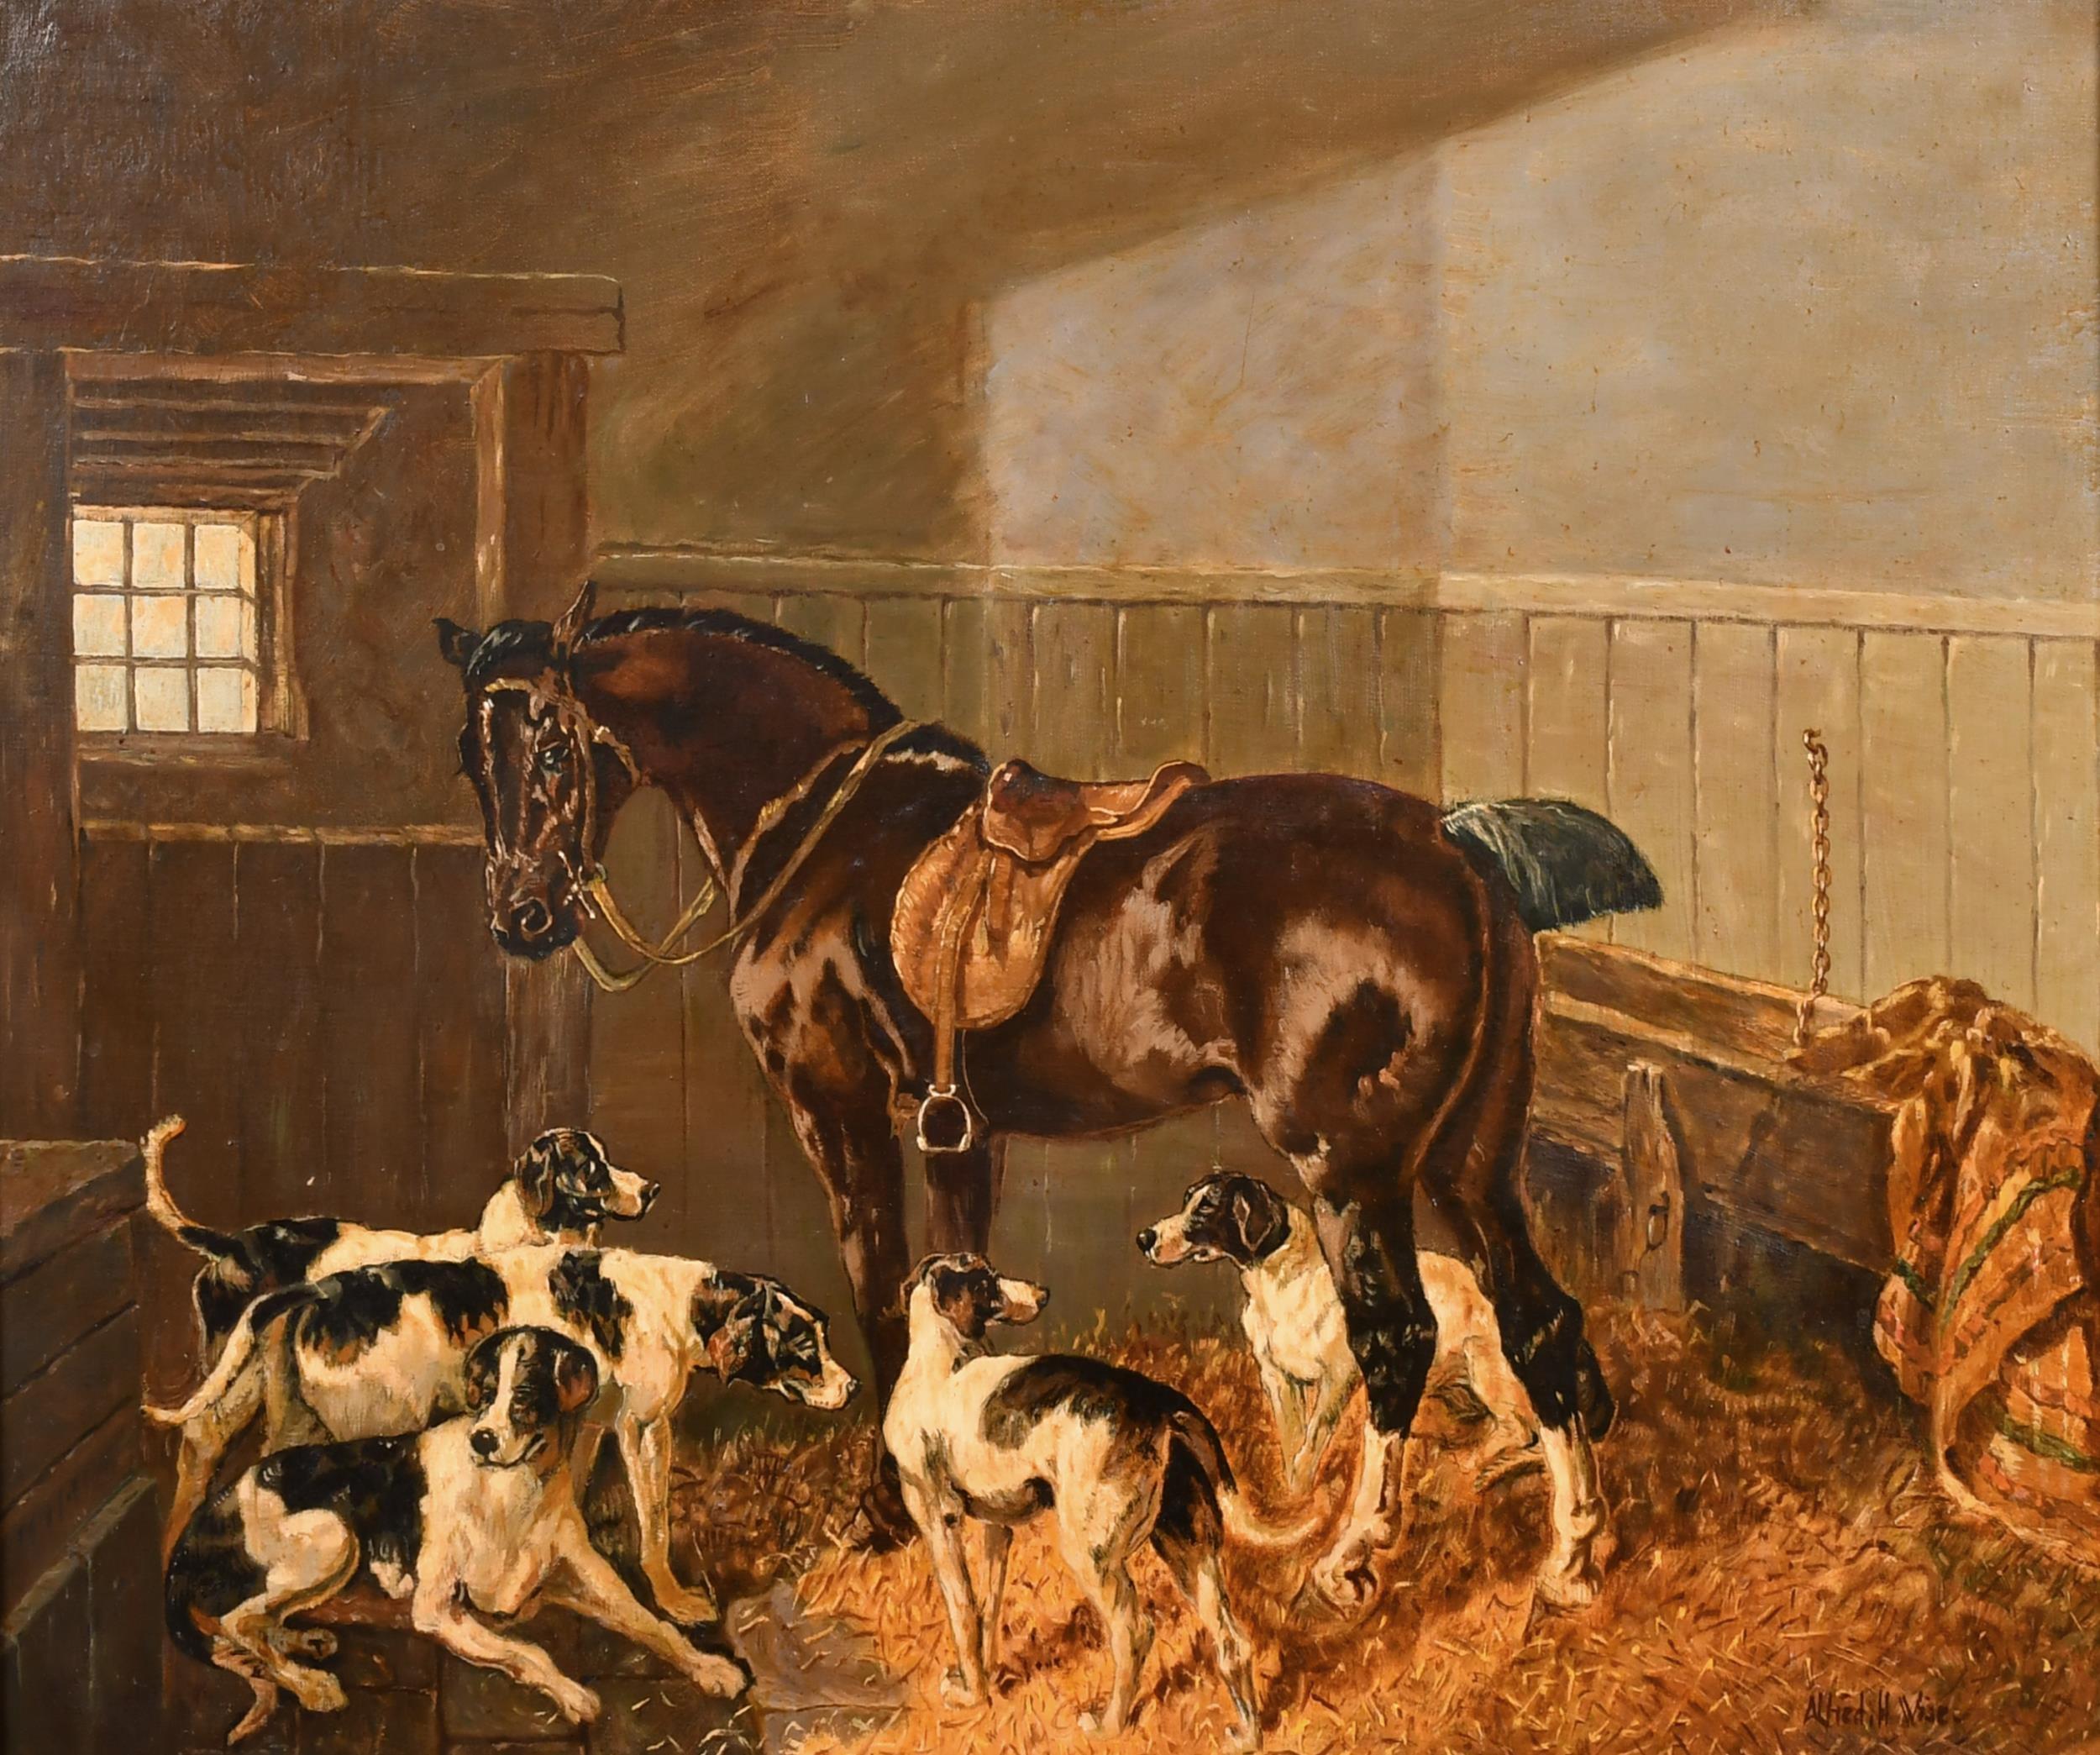 Classic British Sporting Art Oil Painting Horse & Hounds in Stable Interior